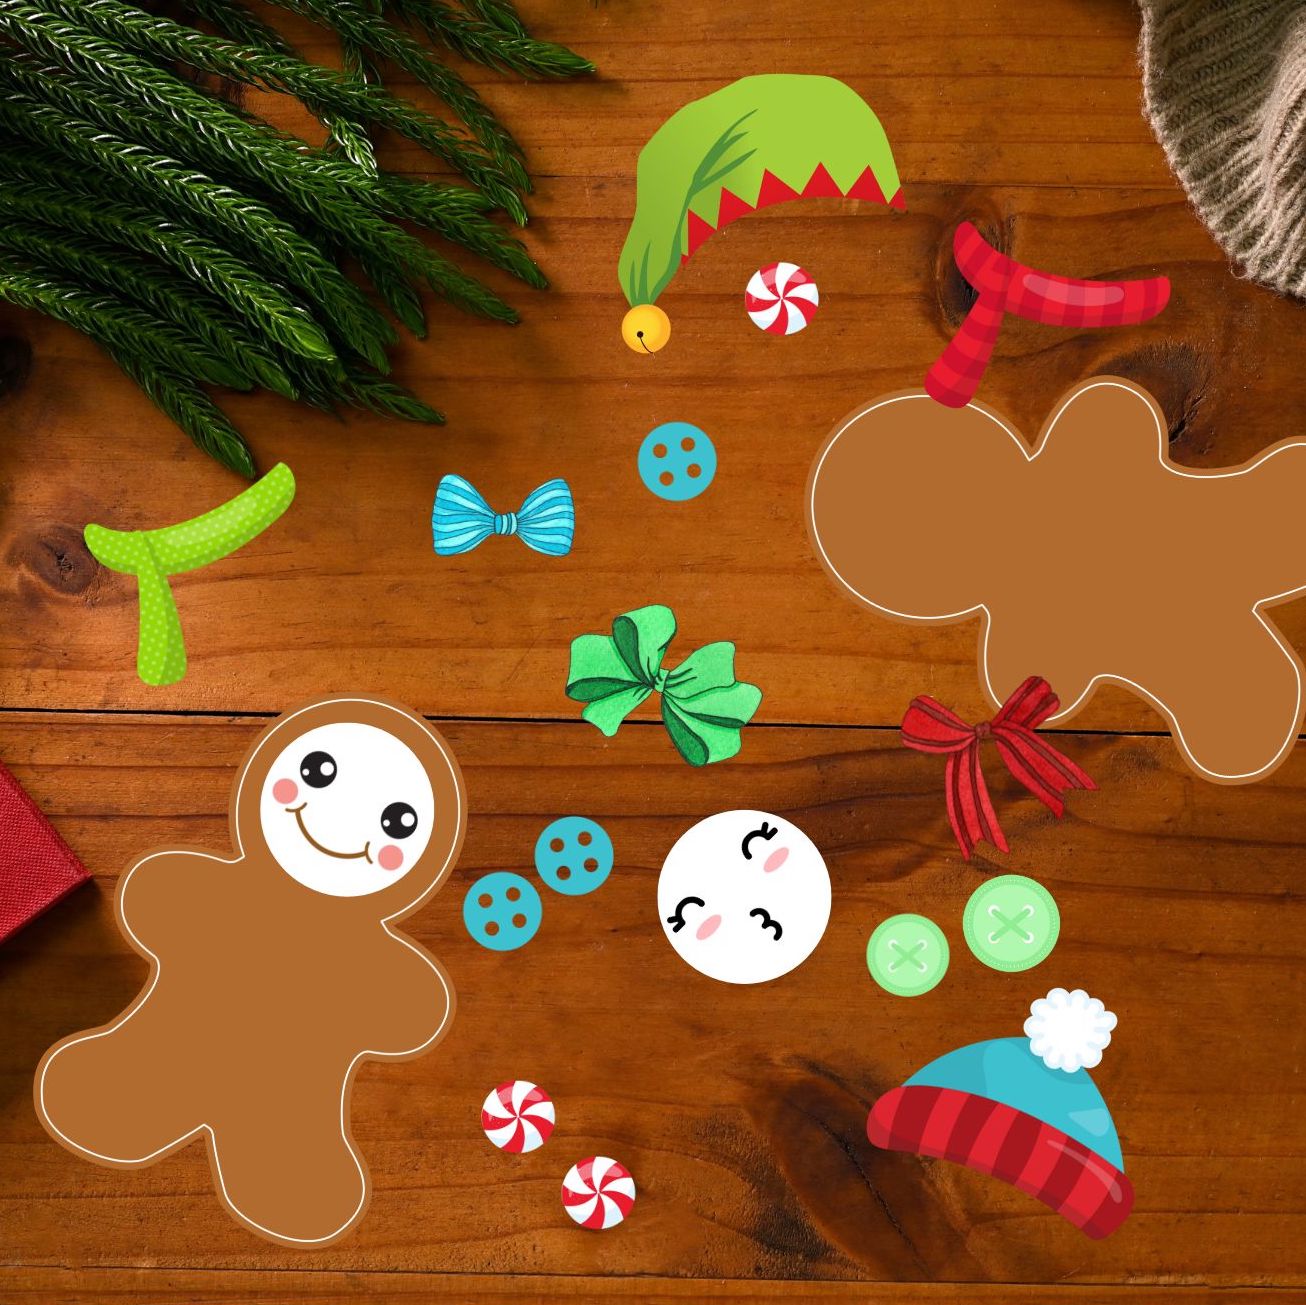 Roll and Decorate Gingerbread Man Game for Christmas.